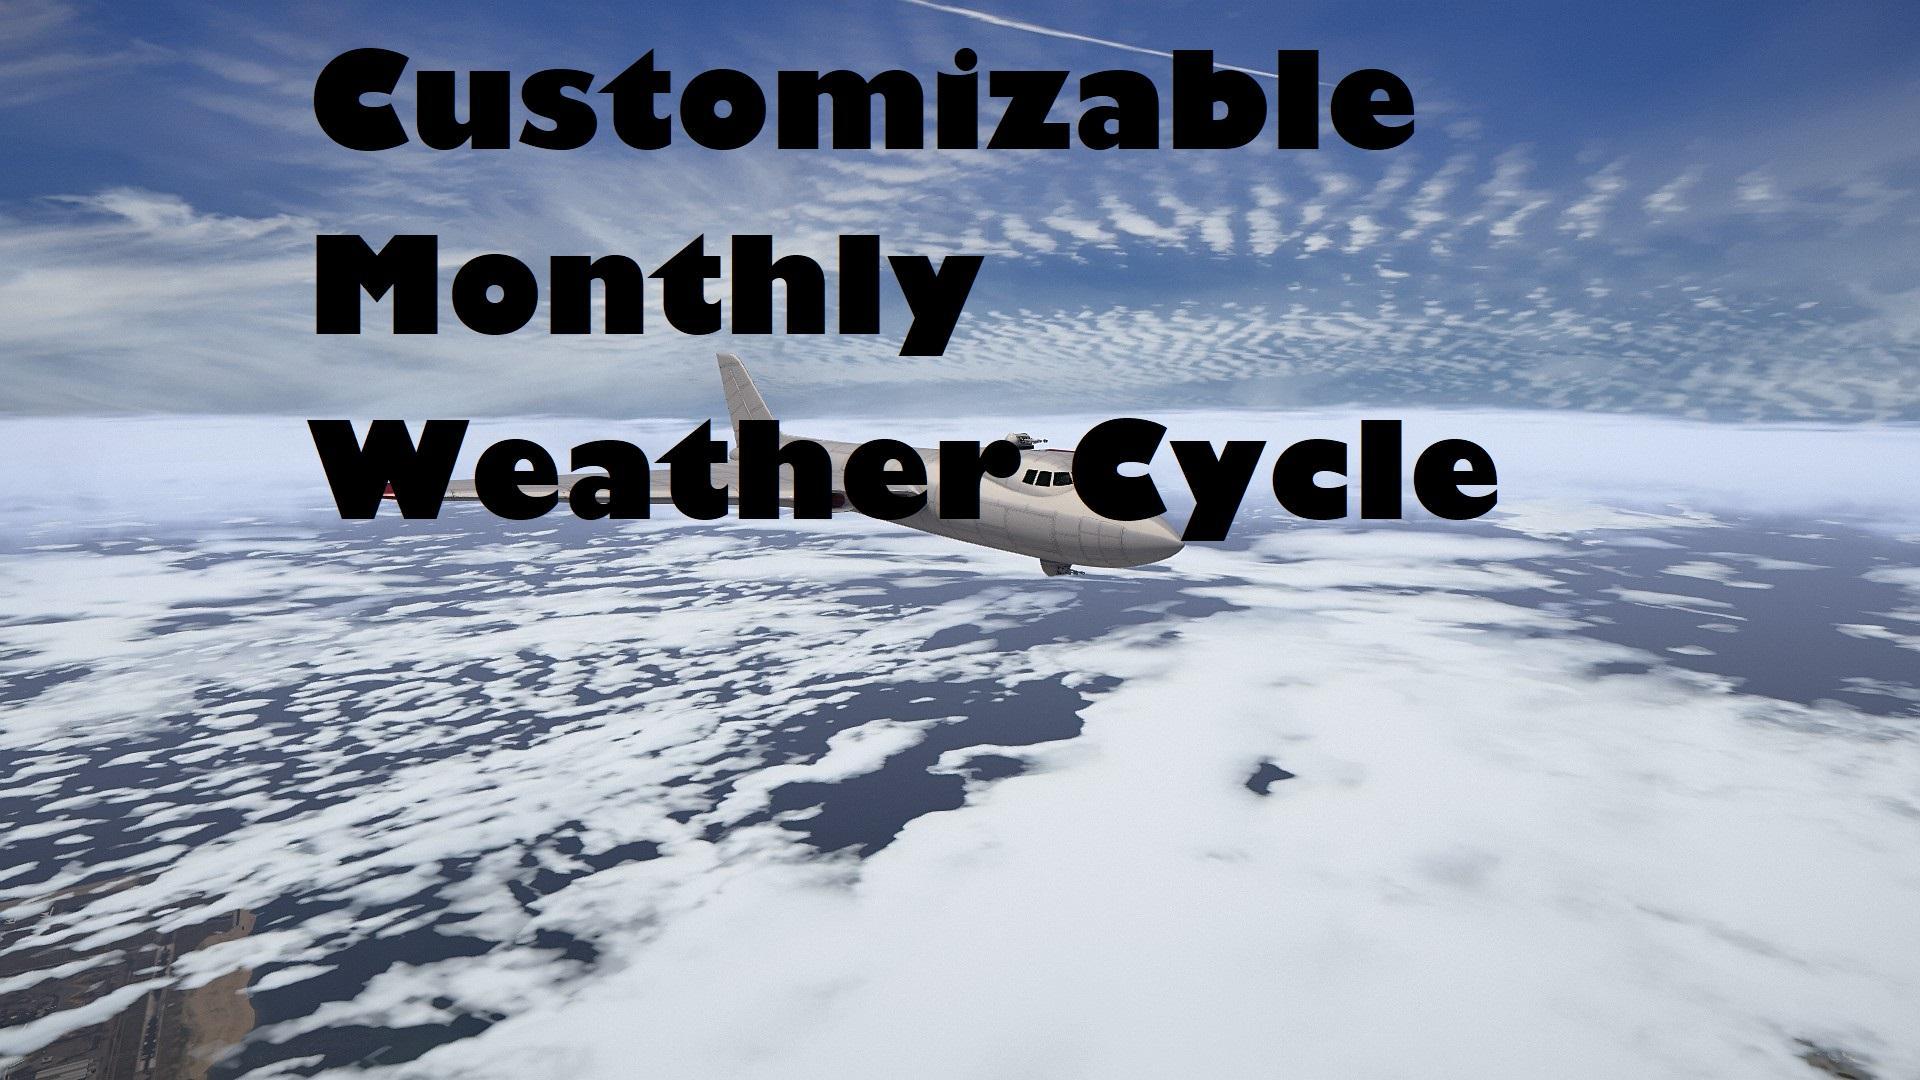 Customizable Monthly Weather Cycle [.NET]